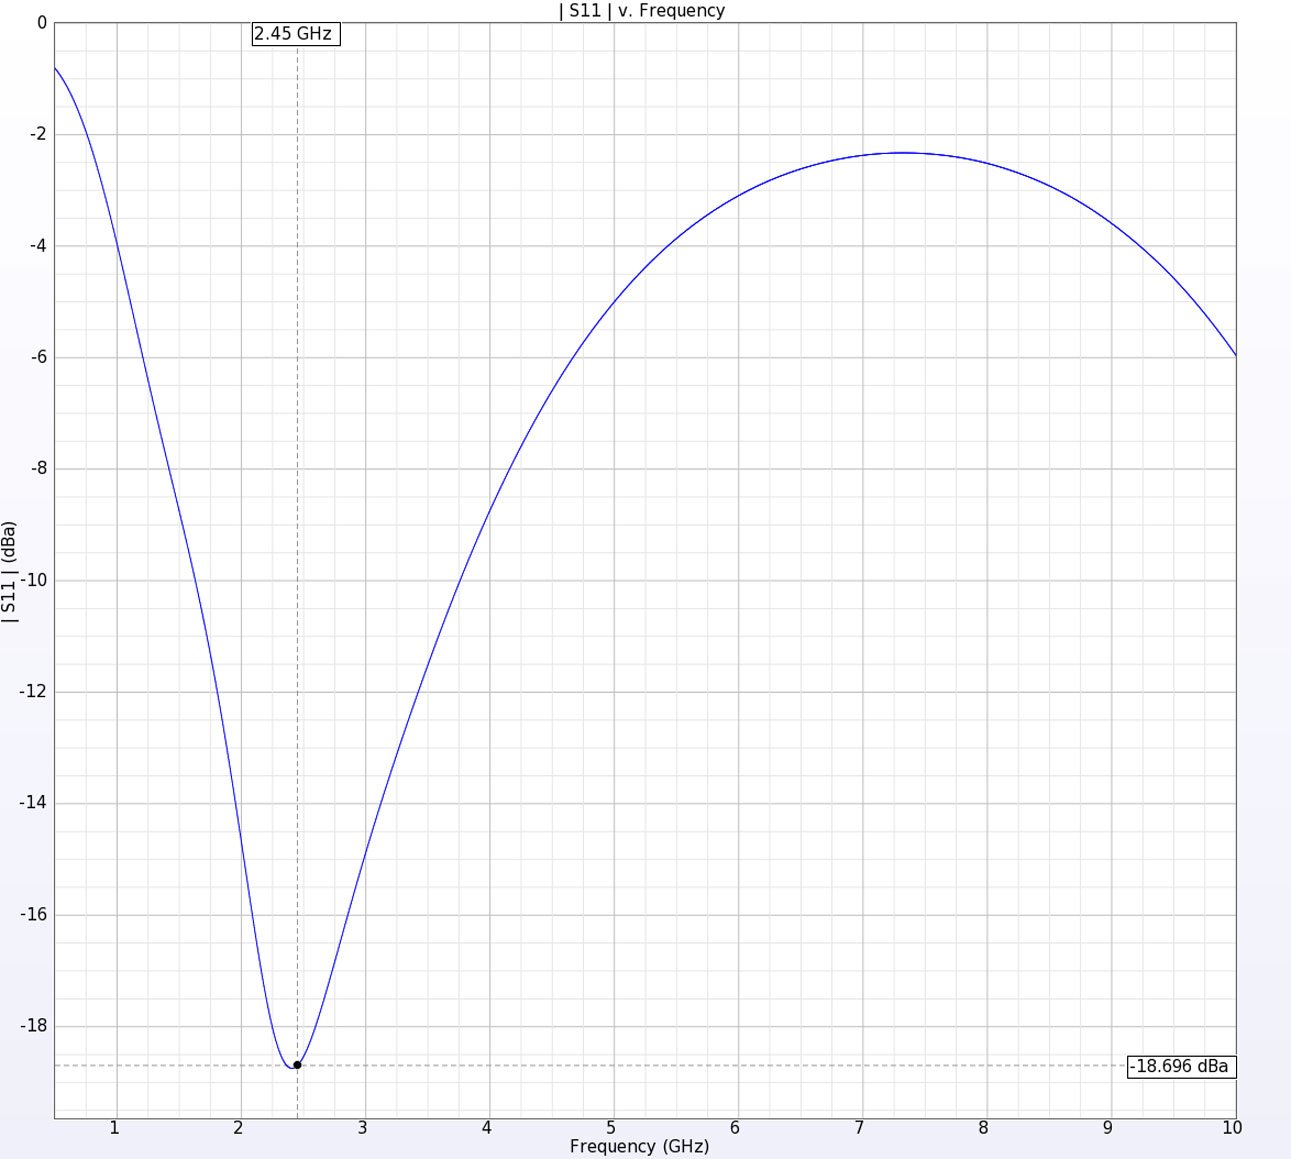 Figure 5: The return loss for the antenna shows acceptable performance at the intended design frequency of 2.45 GHz.